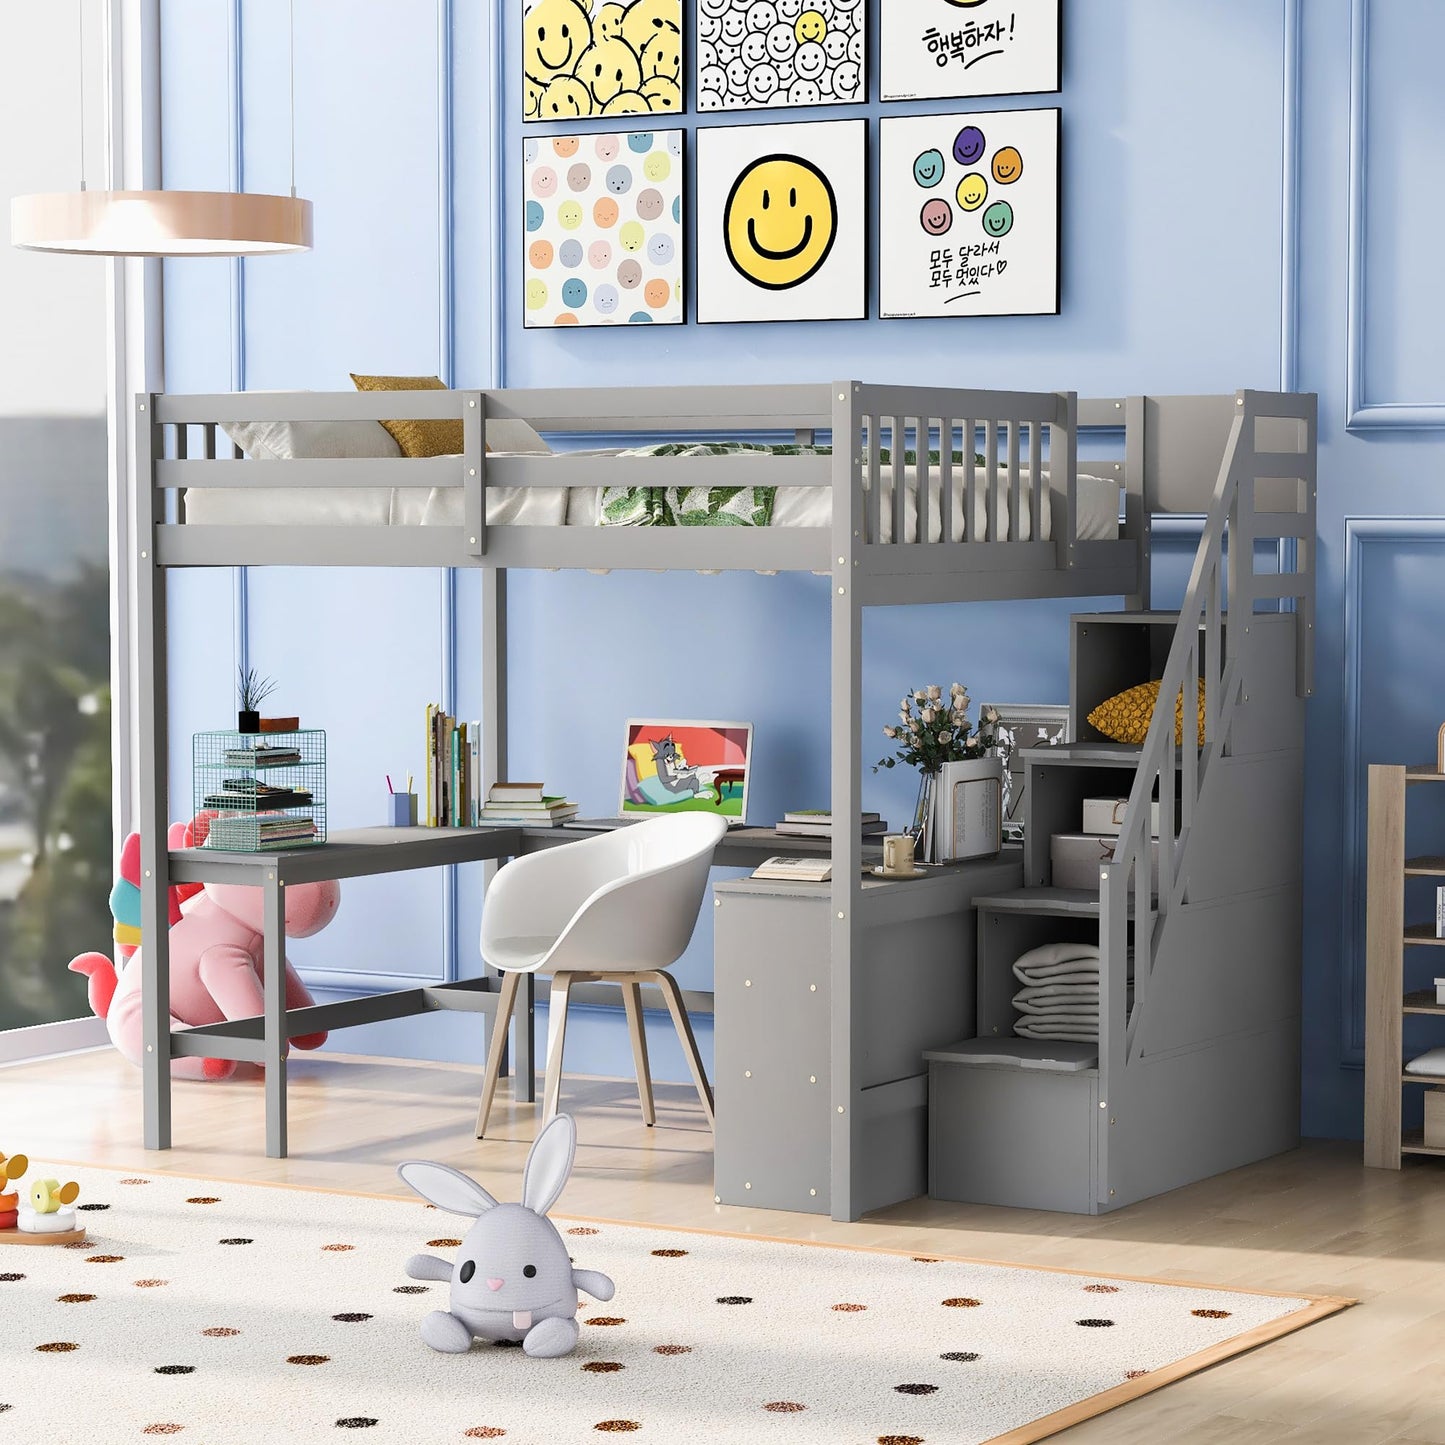 SOFTSEA Full Loft Bed with Desk and Stairs, Solid Wood Loft Bed with Storage Steps, Multi-Function Loft Bed with Storage Cabinet, High Loft Bed for Kids Teens Adults, Grey